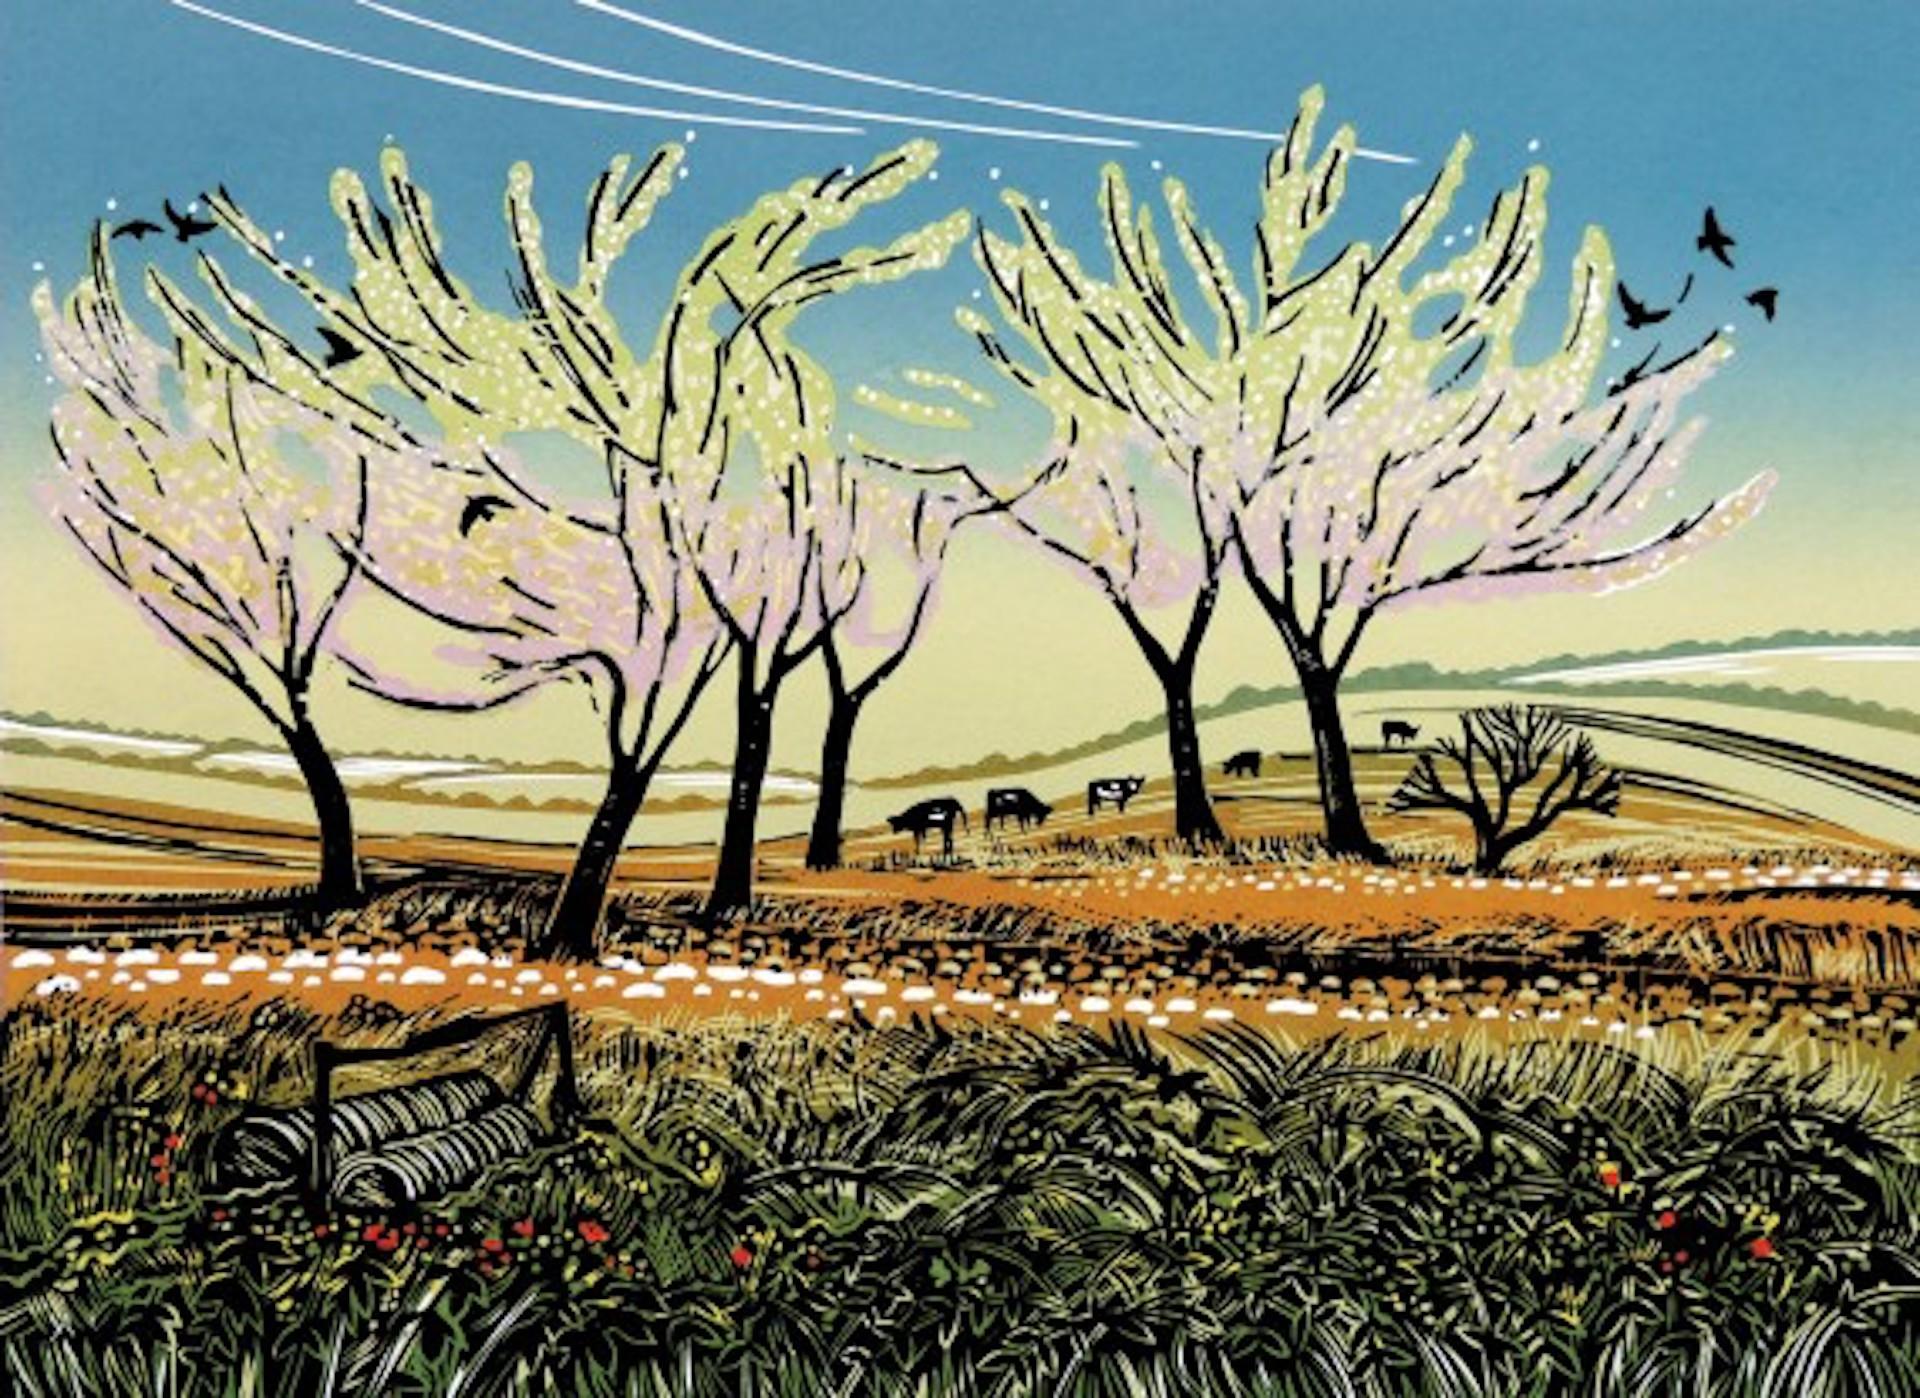 Rob Barnes Animal Print - Blossom in the Wind, Limited Edition Landscape Print, Countryside Linocut 